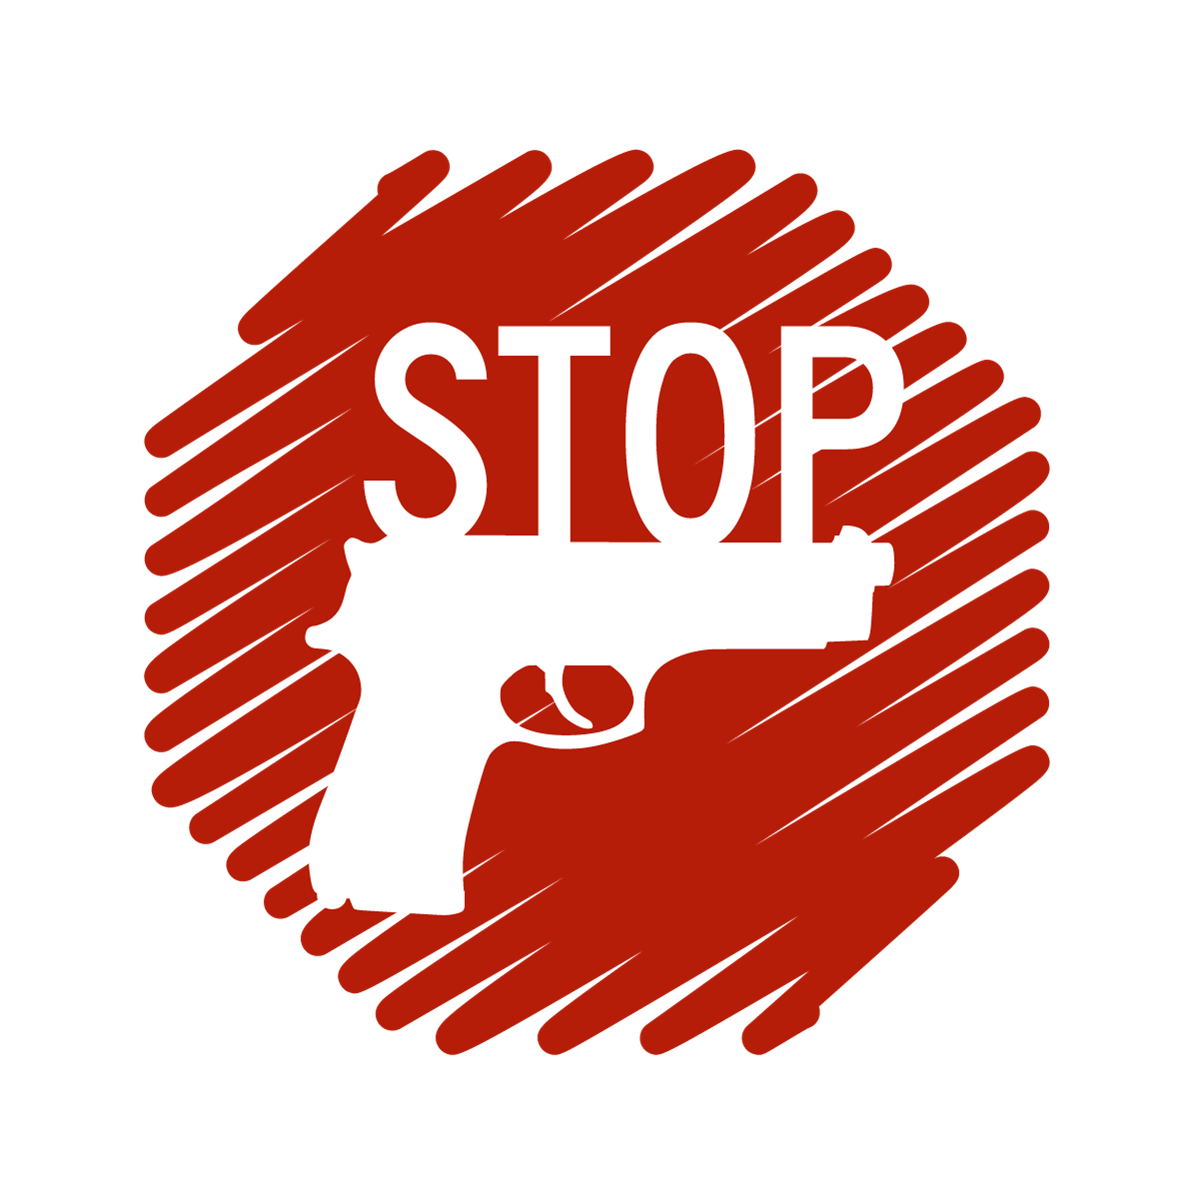 Gun Violence Prevention Initiative to the City of Gainesville